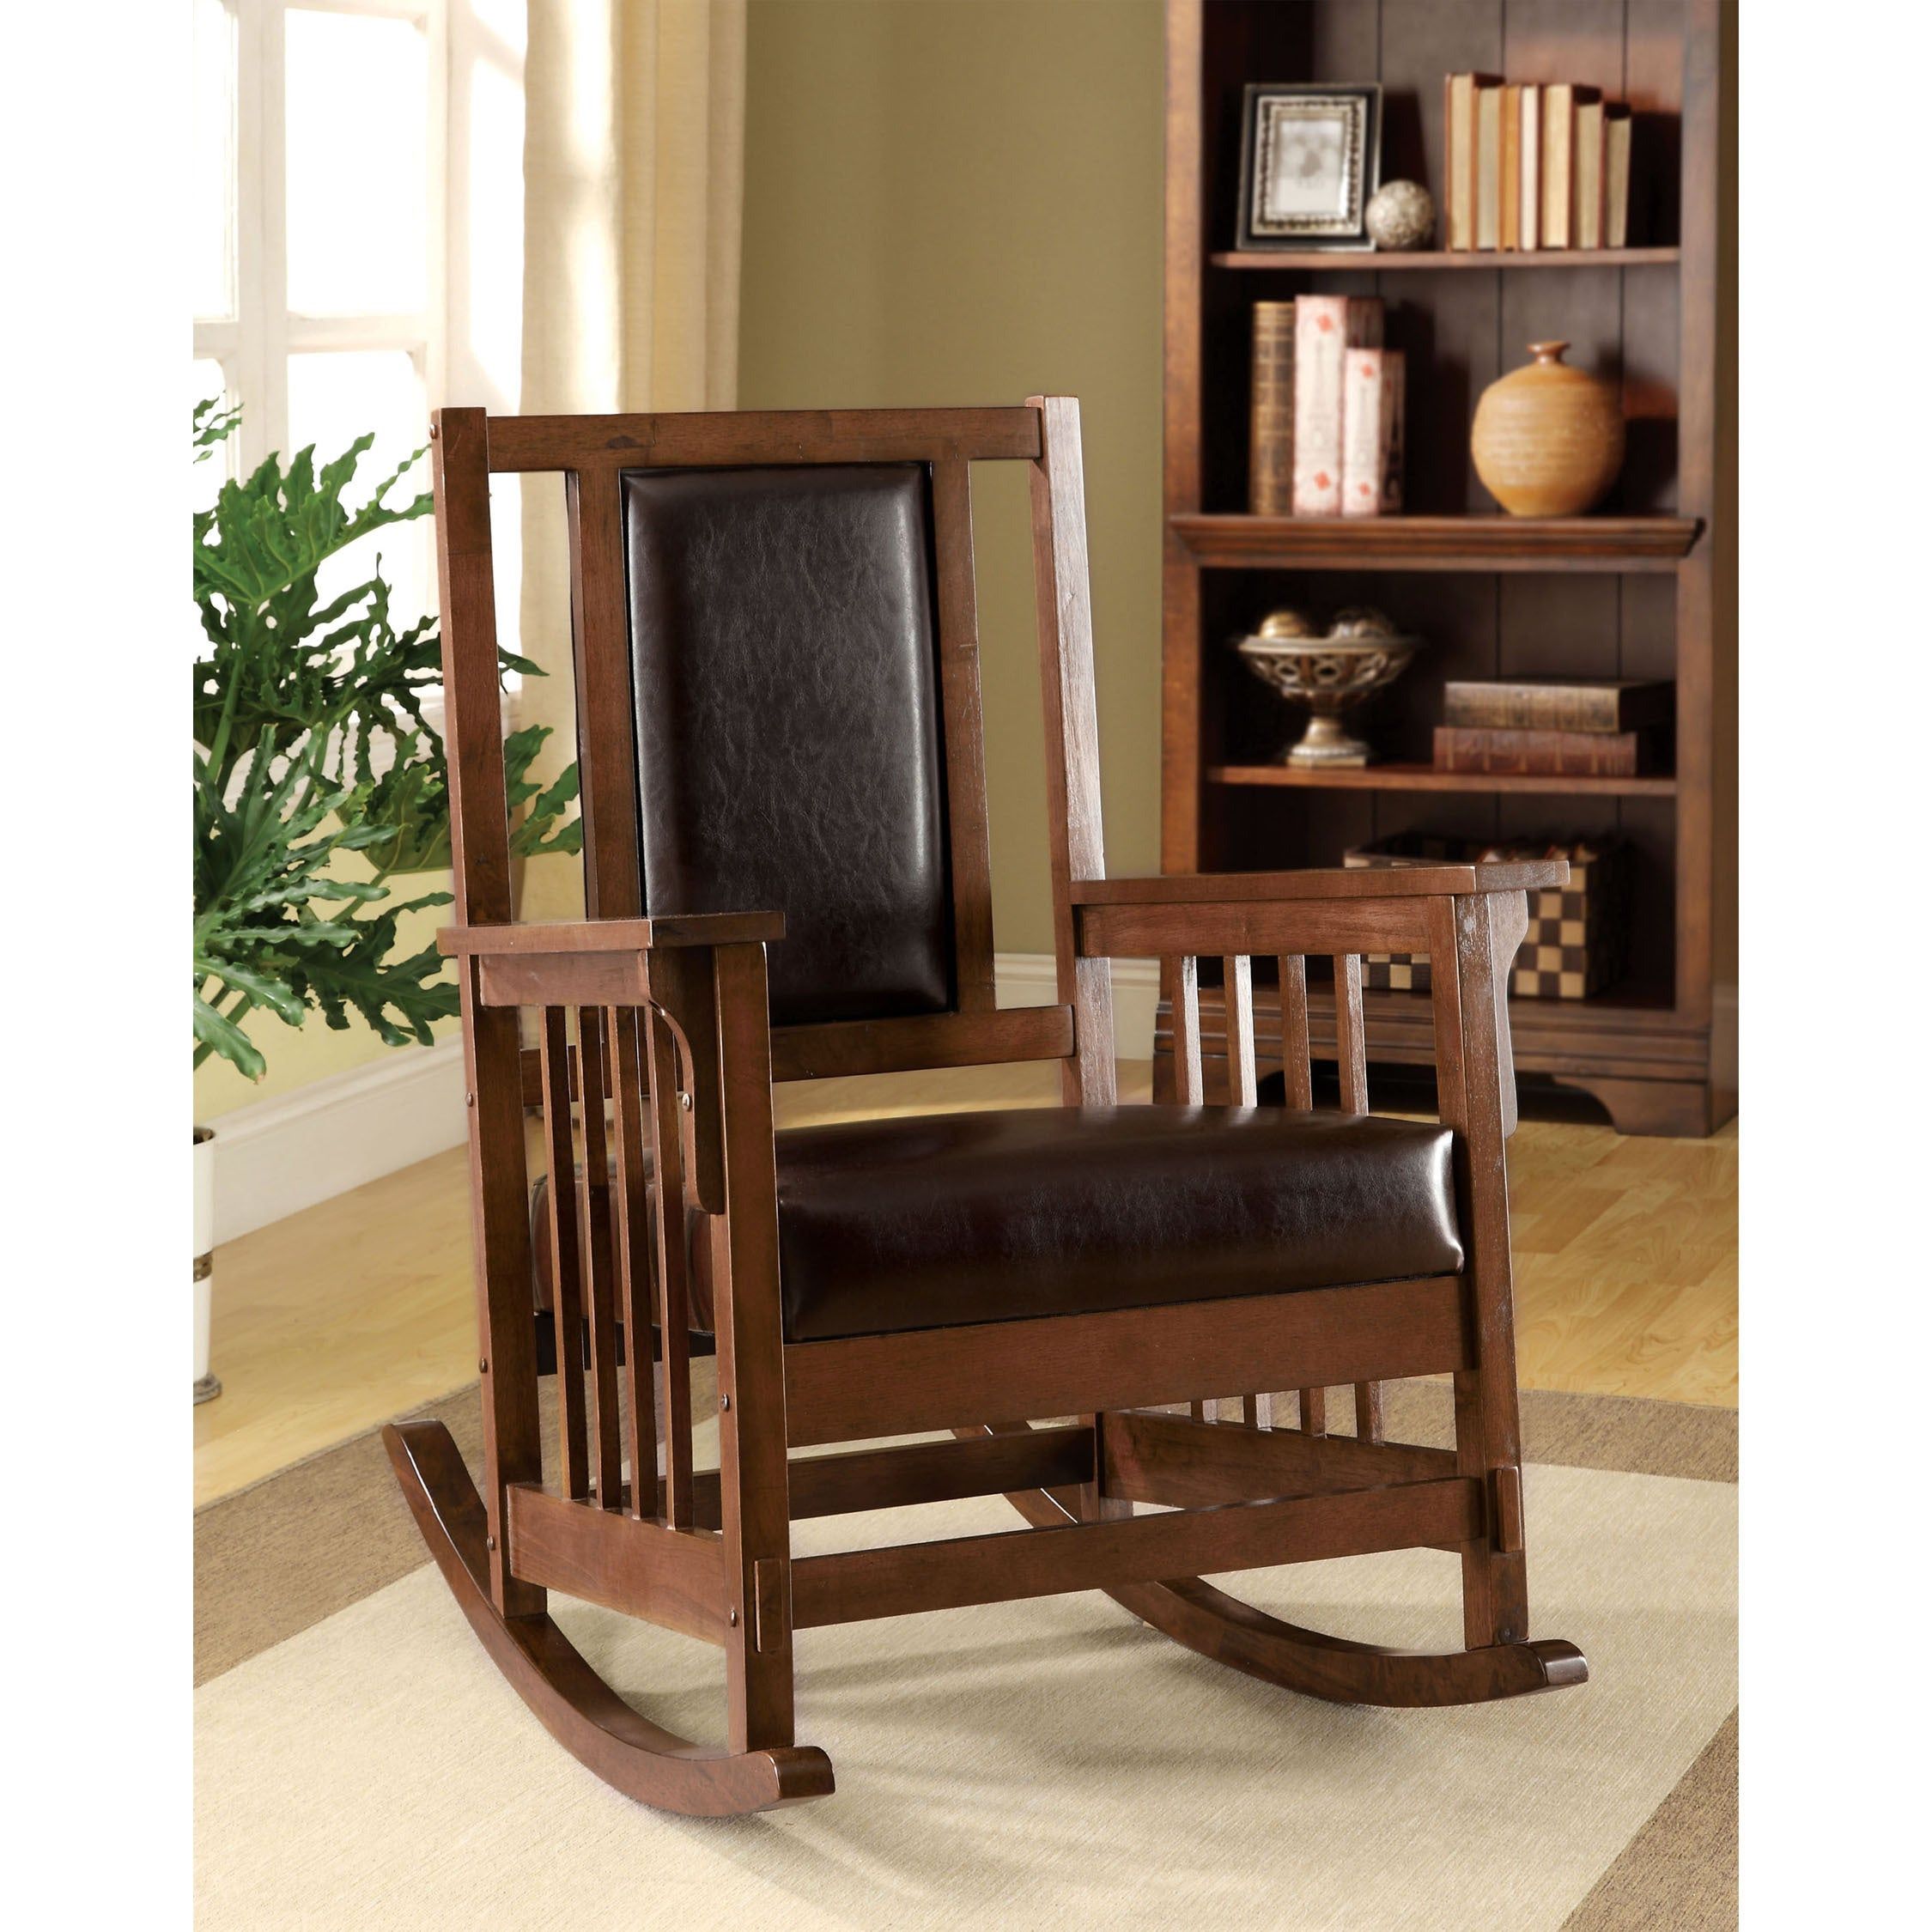 Buy Rocking Chairs, Traditional Living Room Chairs Online At Regarding Judson Traditional Rocking Chairs (Photo 4 of 20)